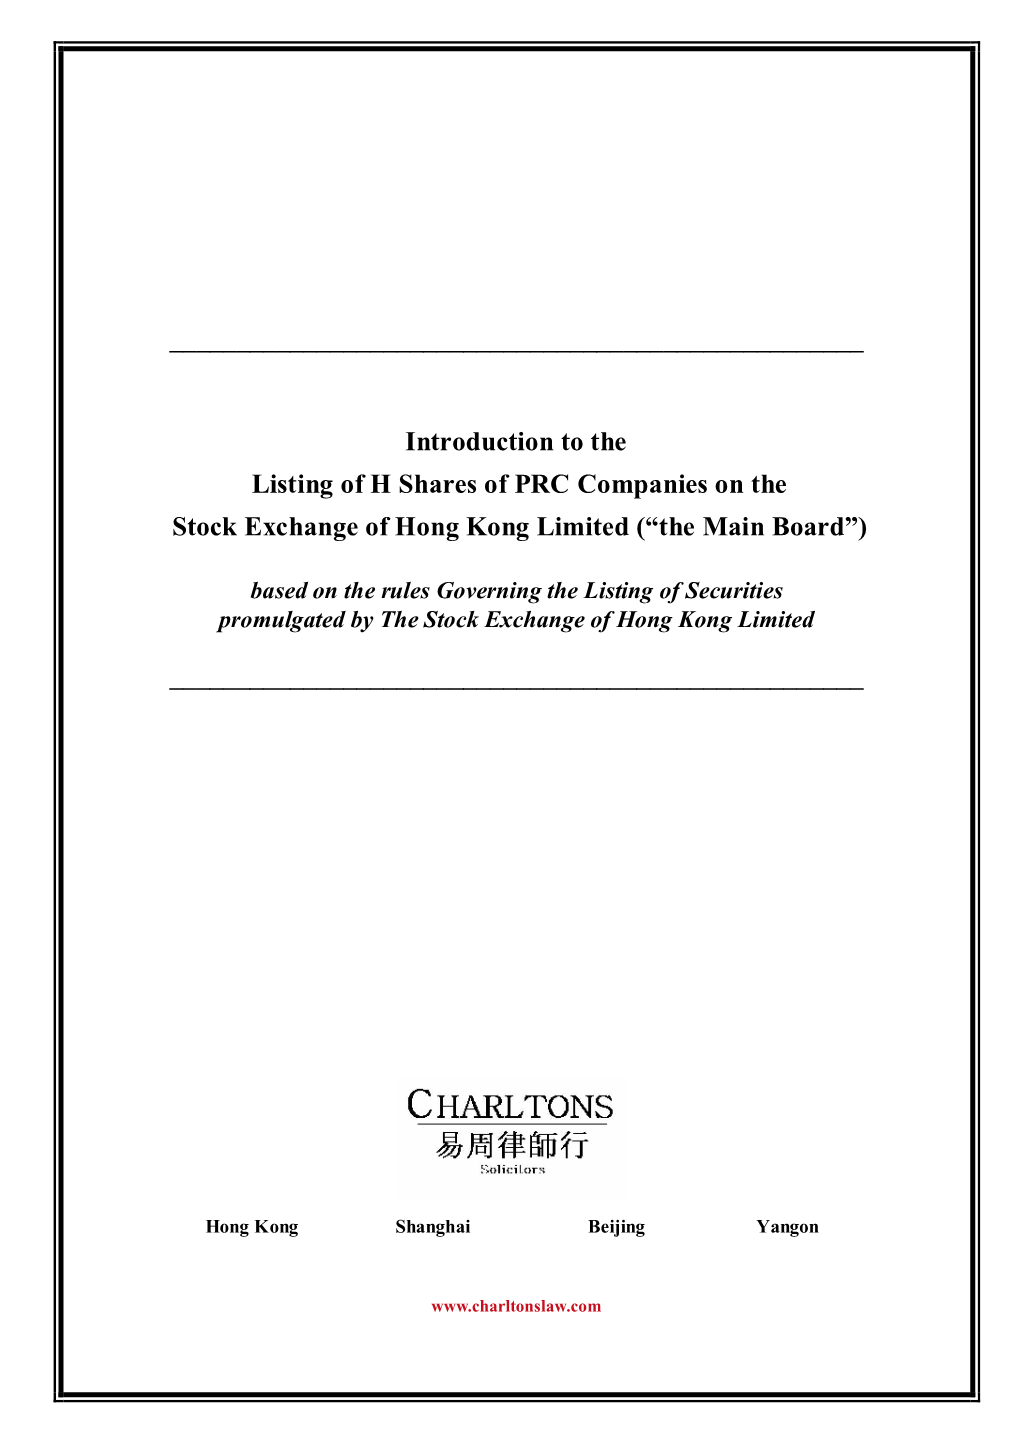 Introduction to the Listing of H Shares of PRC Companies on the Stock Exchange of Hong Kong Limited (“The Main Board”)